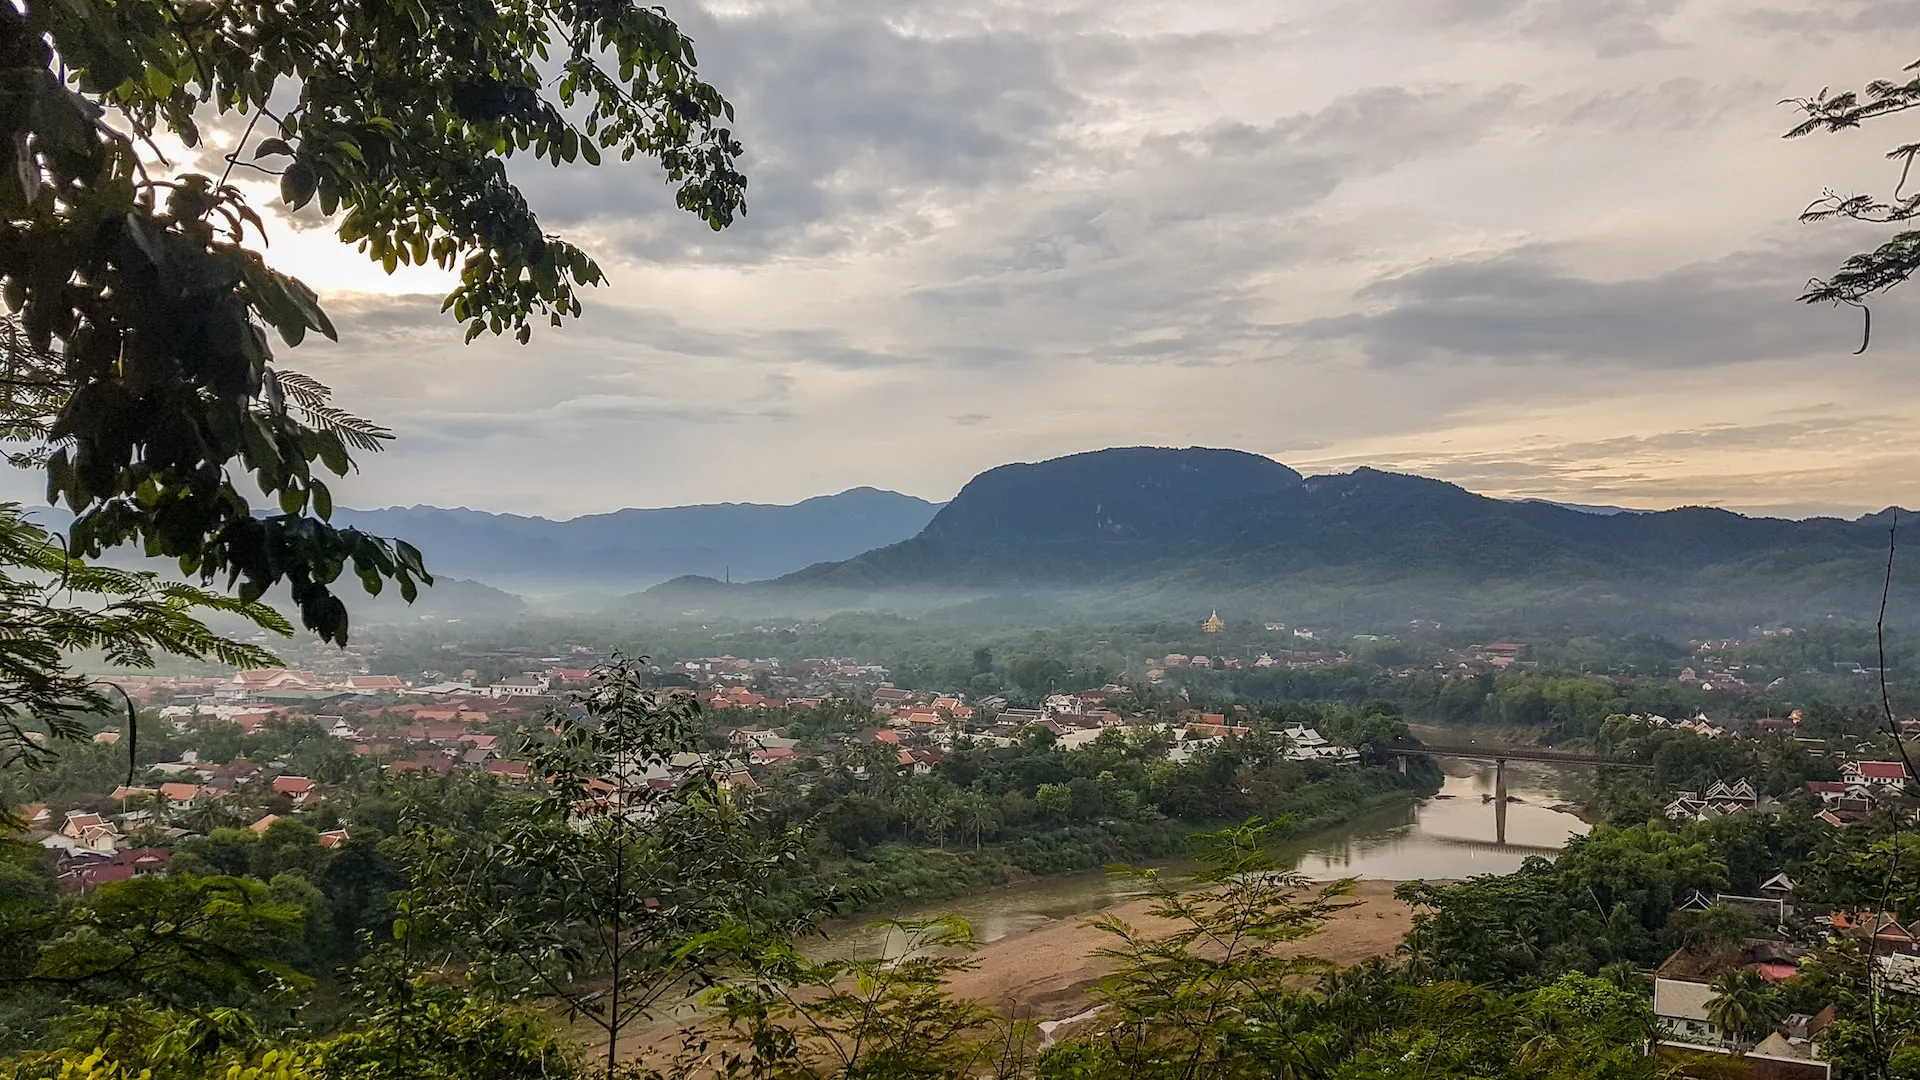 Aerial view of Luang Prabang, Source: Photo by Colin Roe on Unsplash